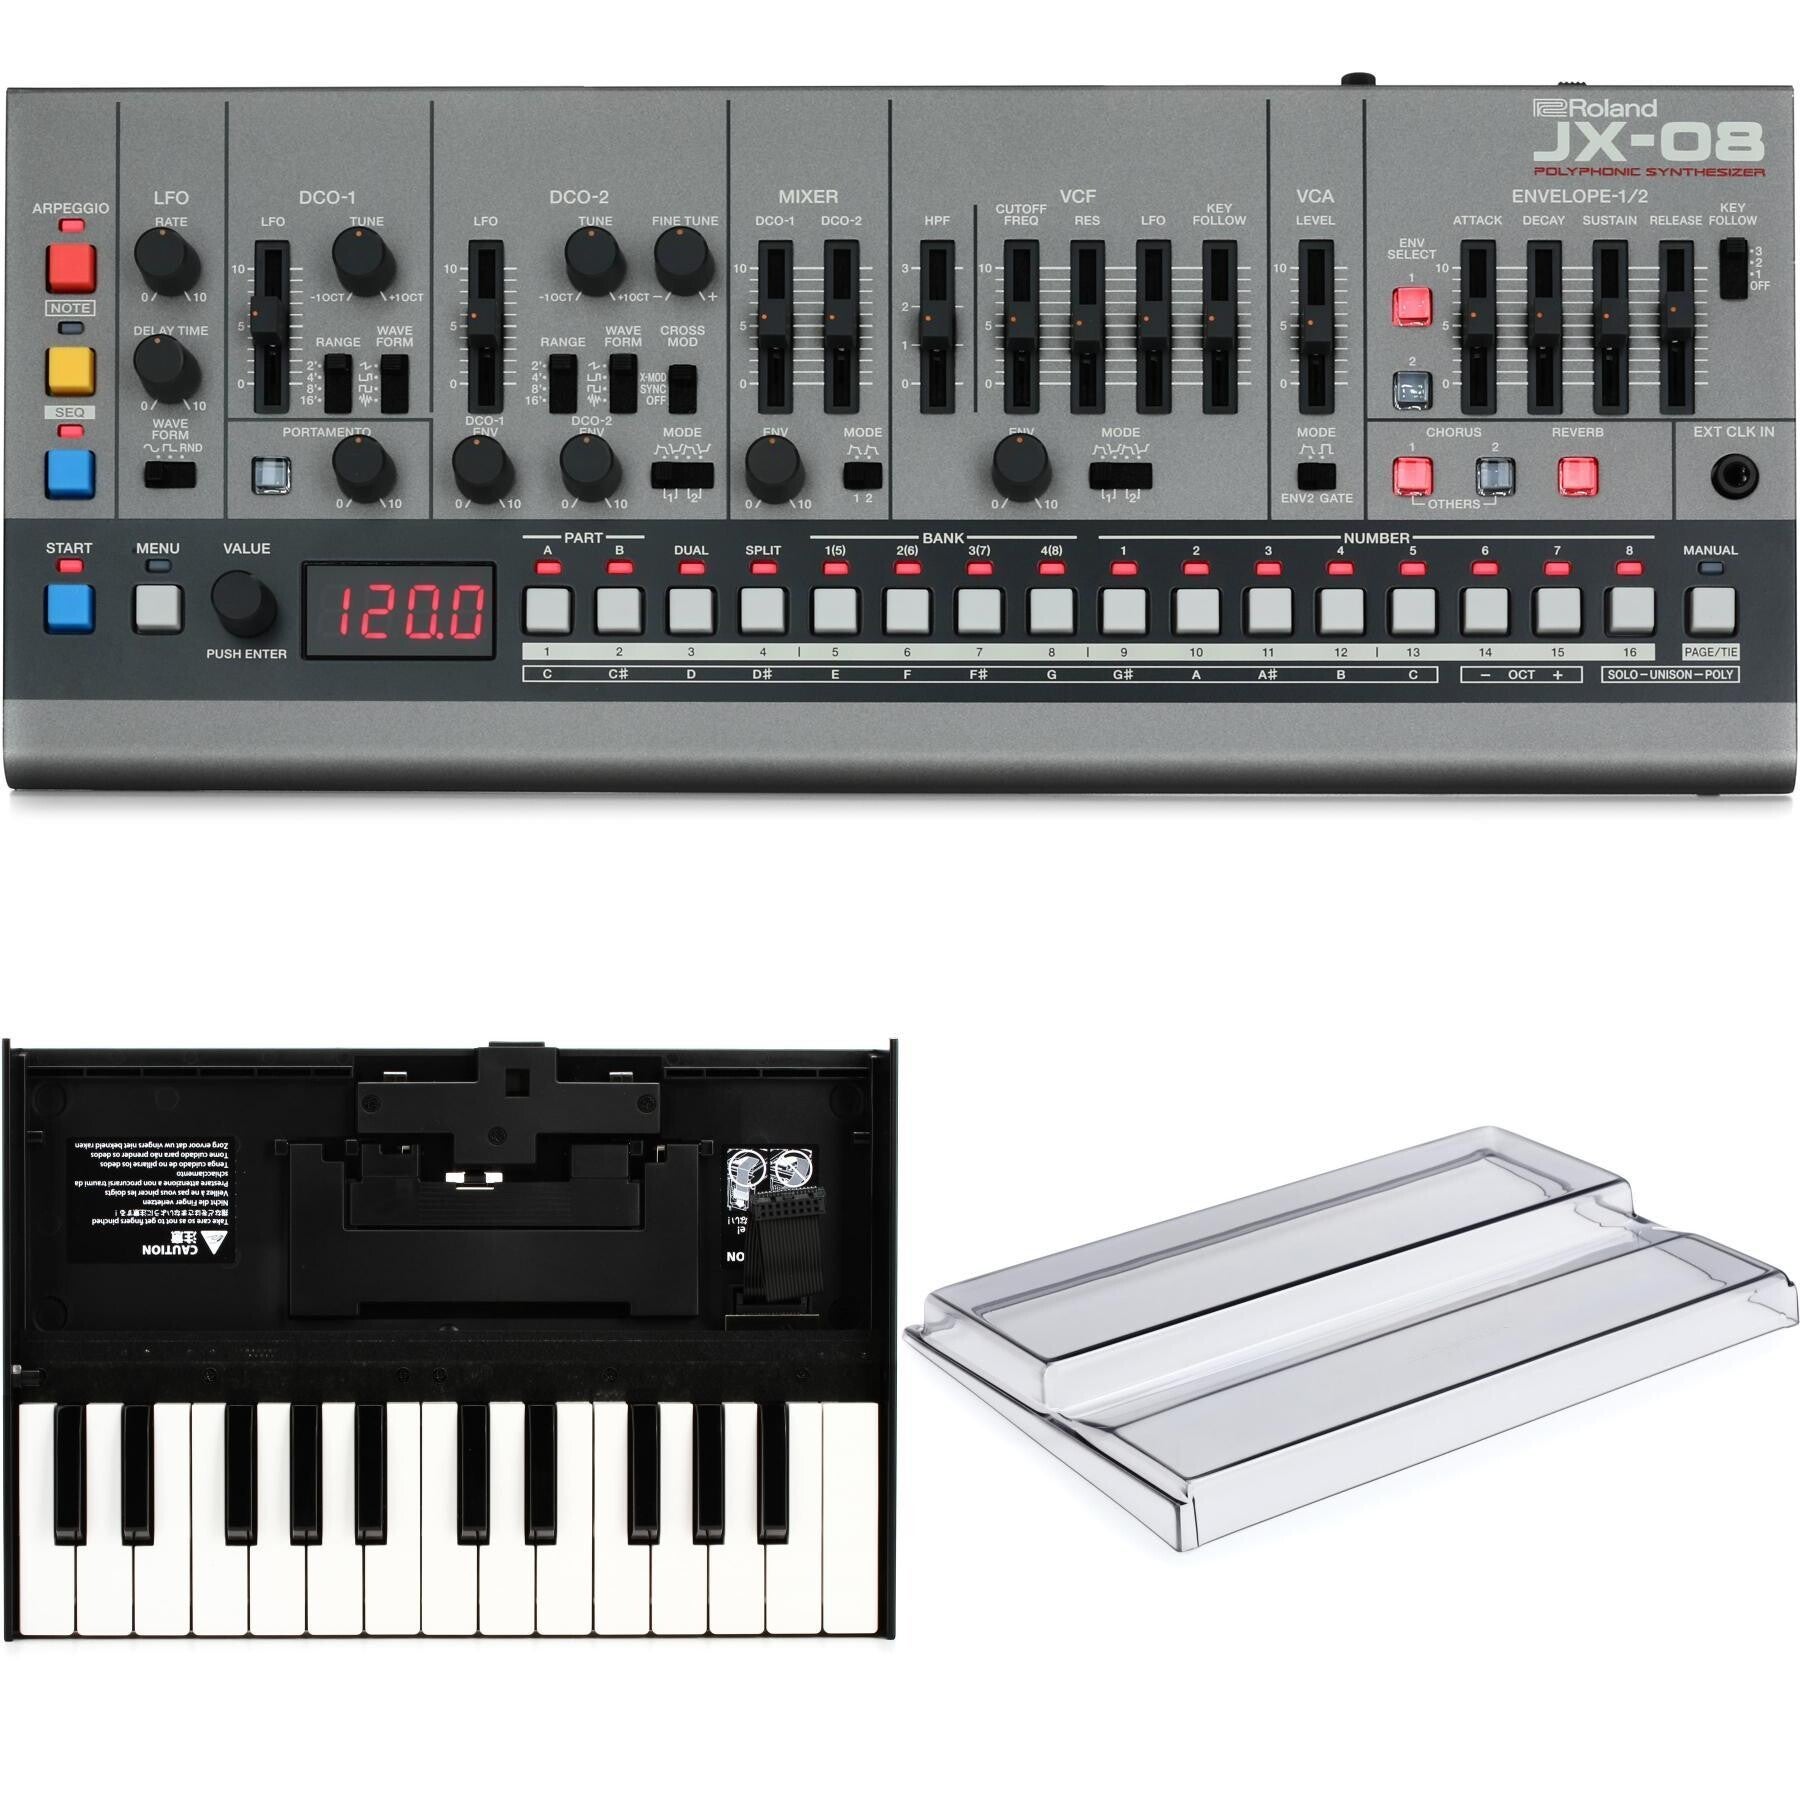 Roland JX-08 Boutique Series JX-8P Sound Module with Keyboard and